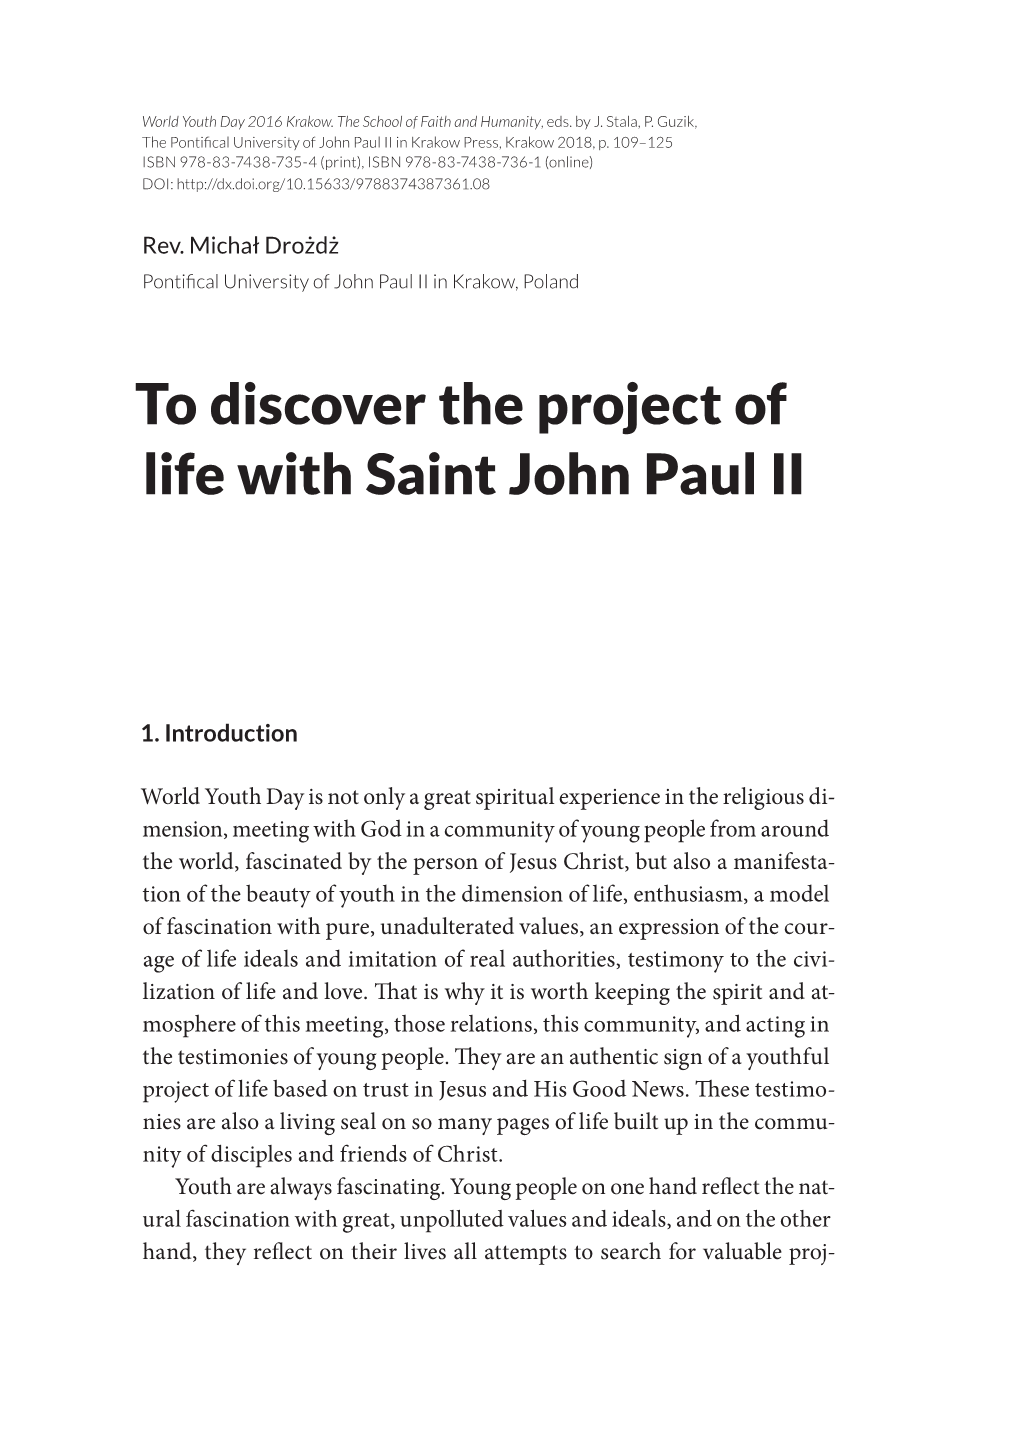 To Discover the Project of Life with Saint John Paul II